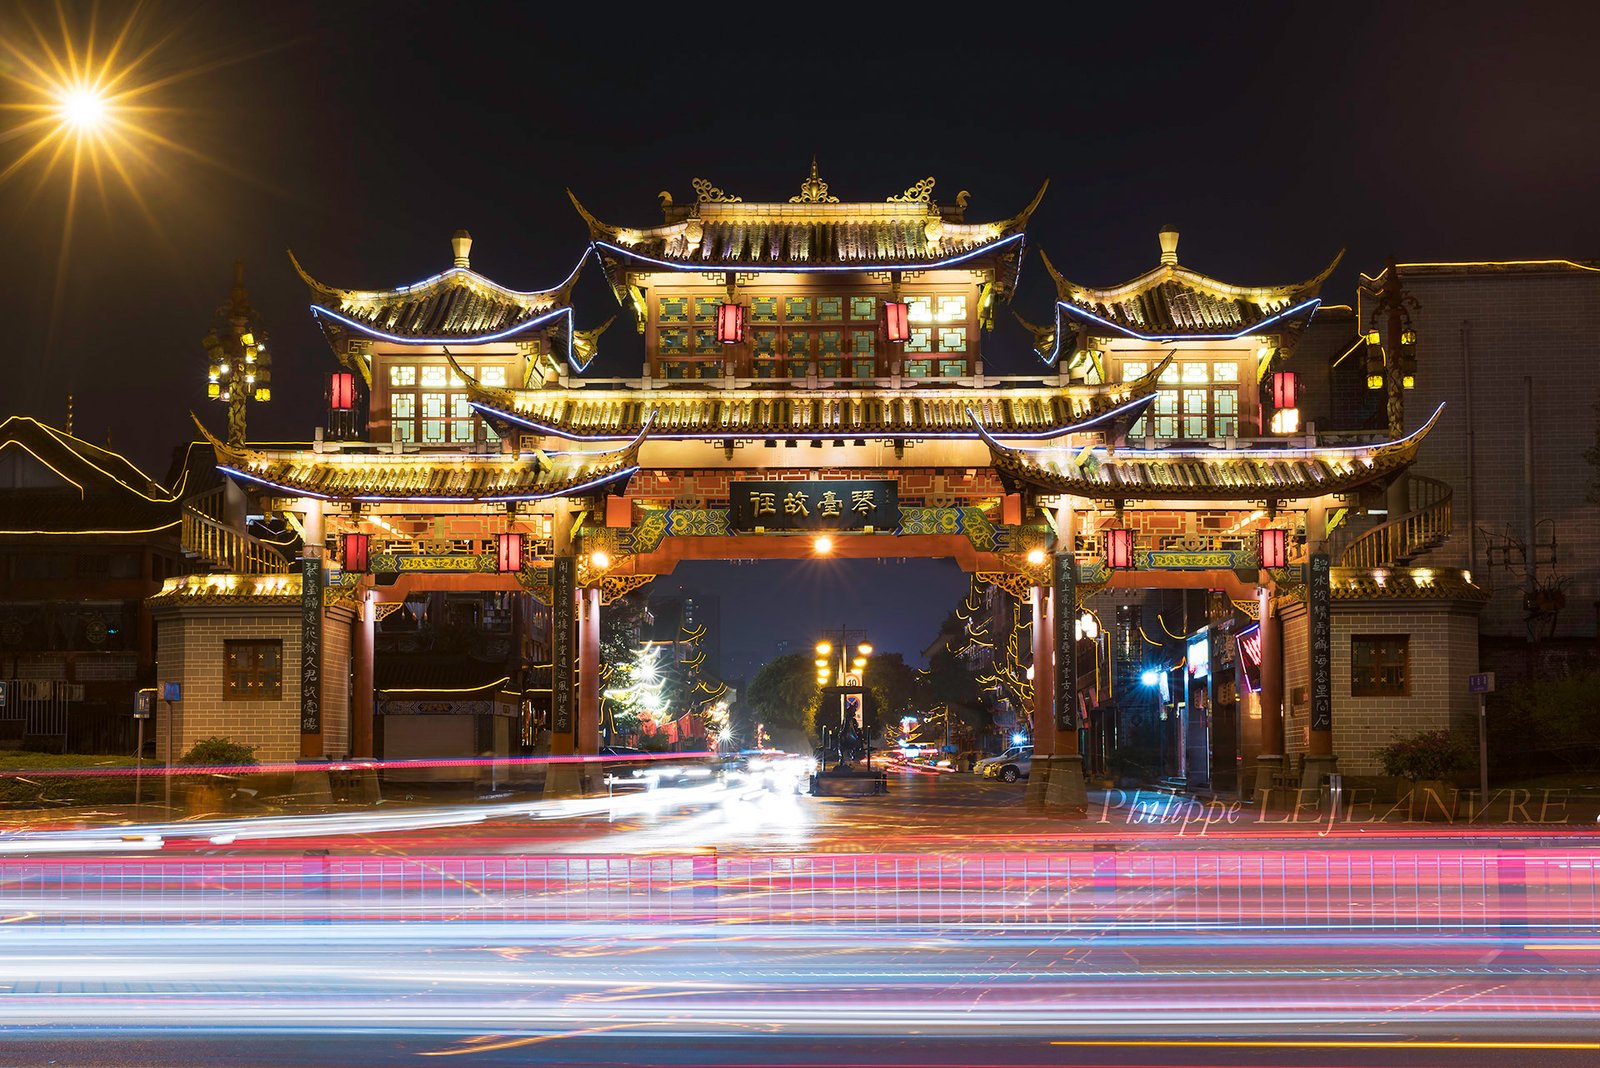 QinTaiLu gate at night with car light trails in Chengdu, Sichuan province, China